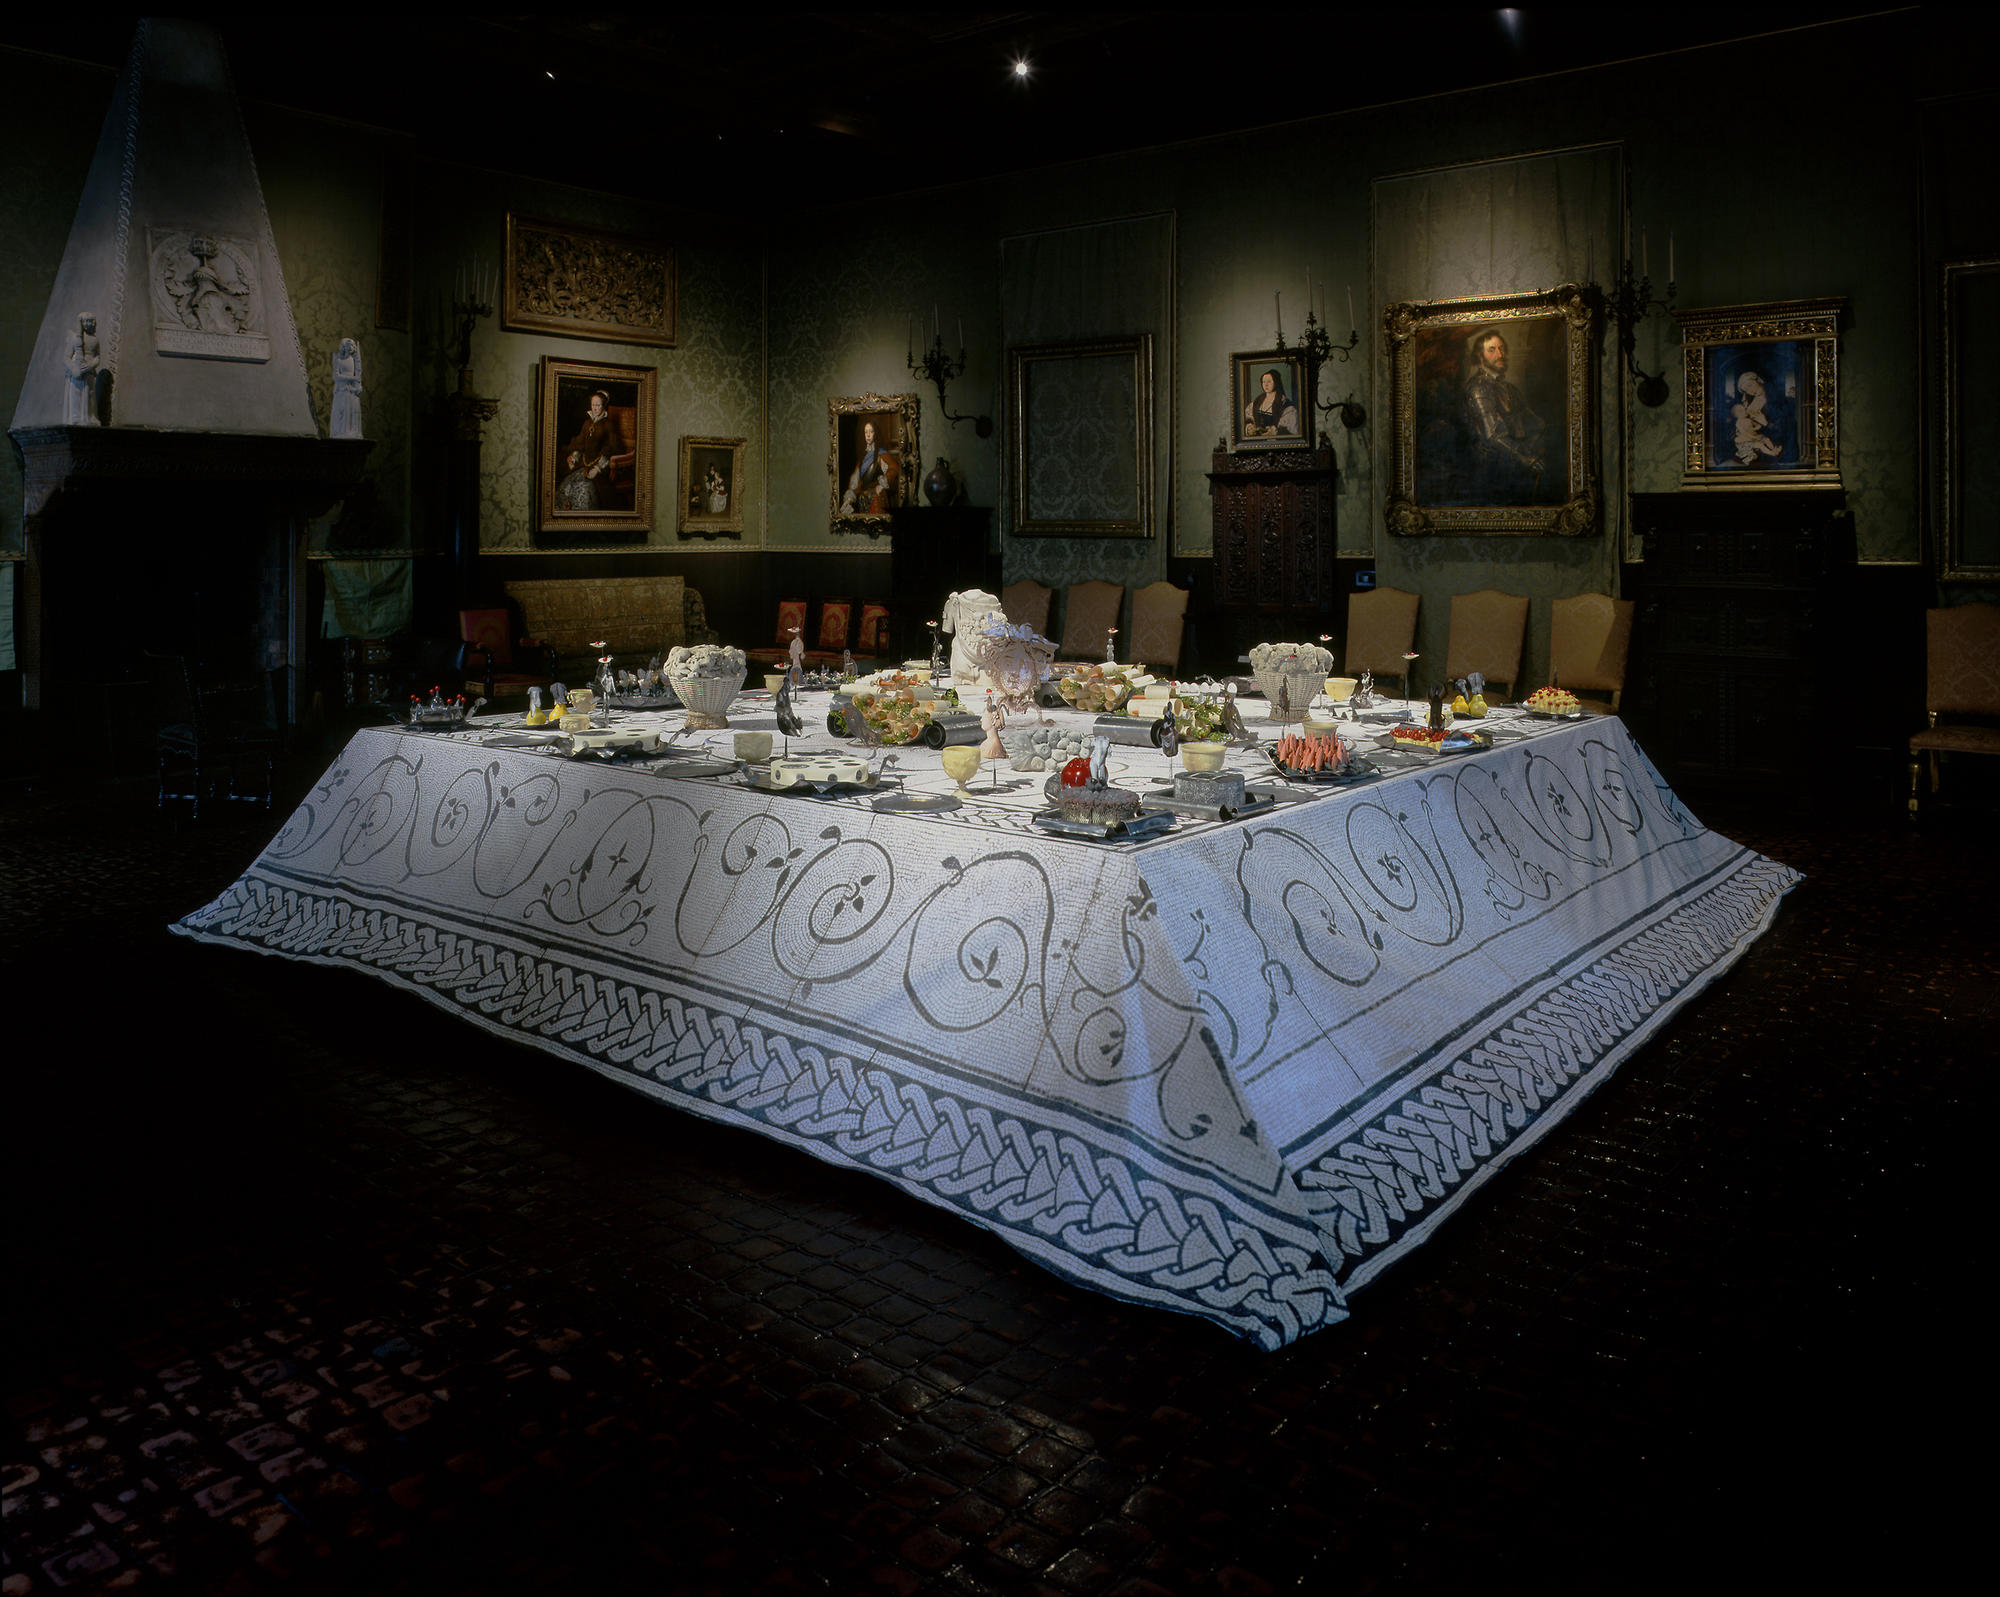 Michele Iodice, ichele Iodice, A Pagan Feast,  site-specific work for the Dutch Room, paper, lead, Roman marble, silk screen printing on fabric. 6 x 6 m.  November 22, 2005 – January 8, 2006, Isabella Stewart Gardner Museum, Boston. Image by Clements/Howcroft Photography.